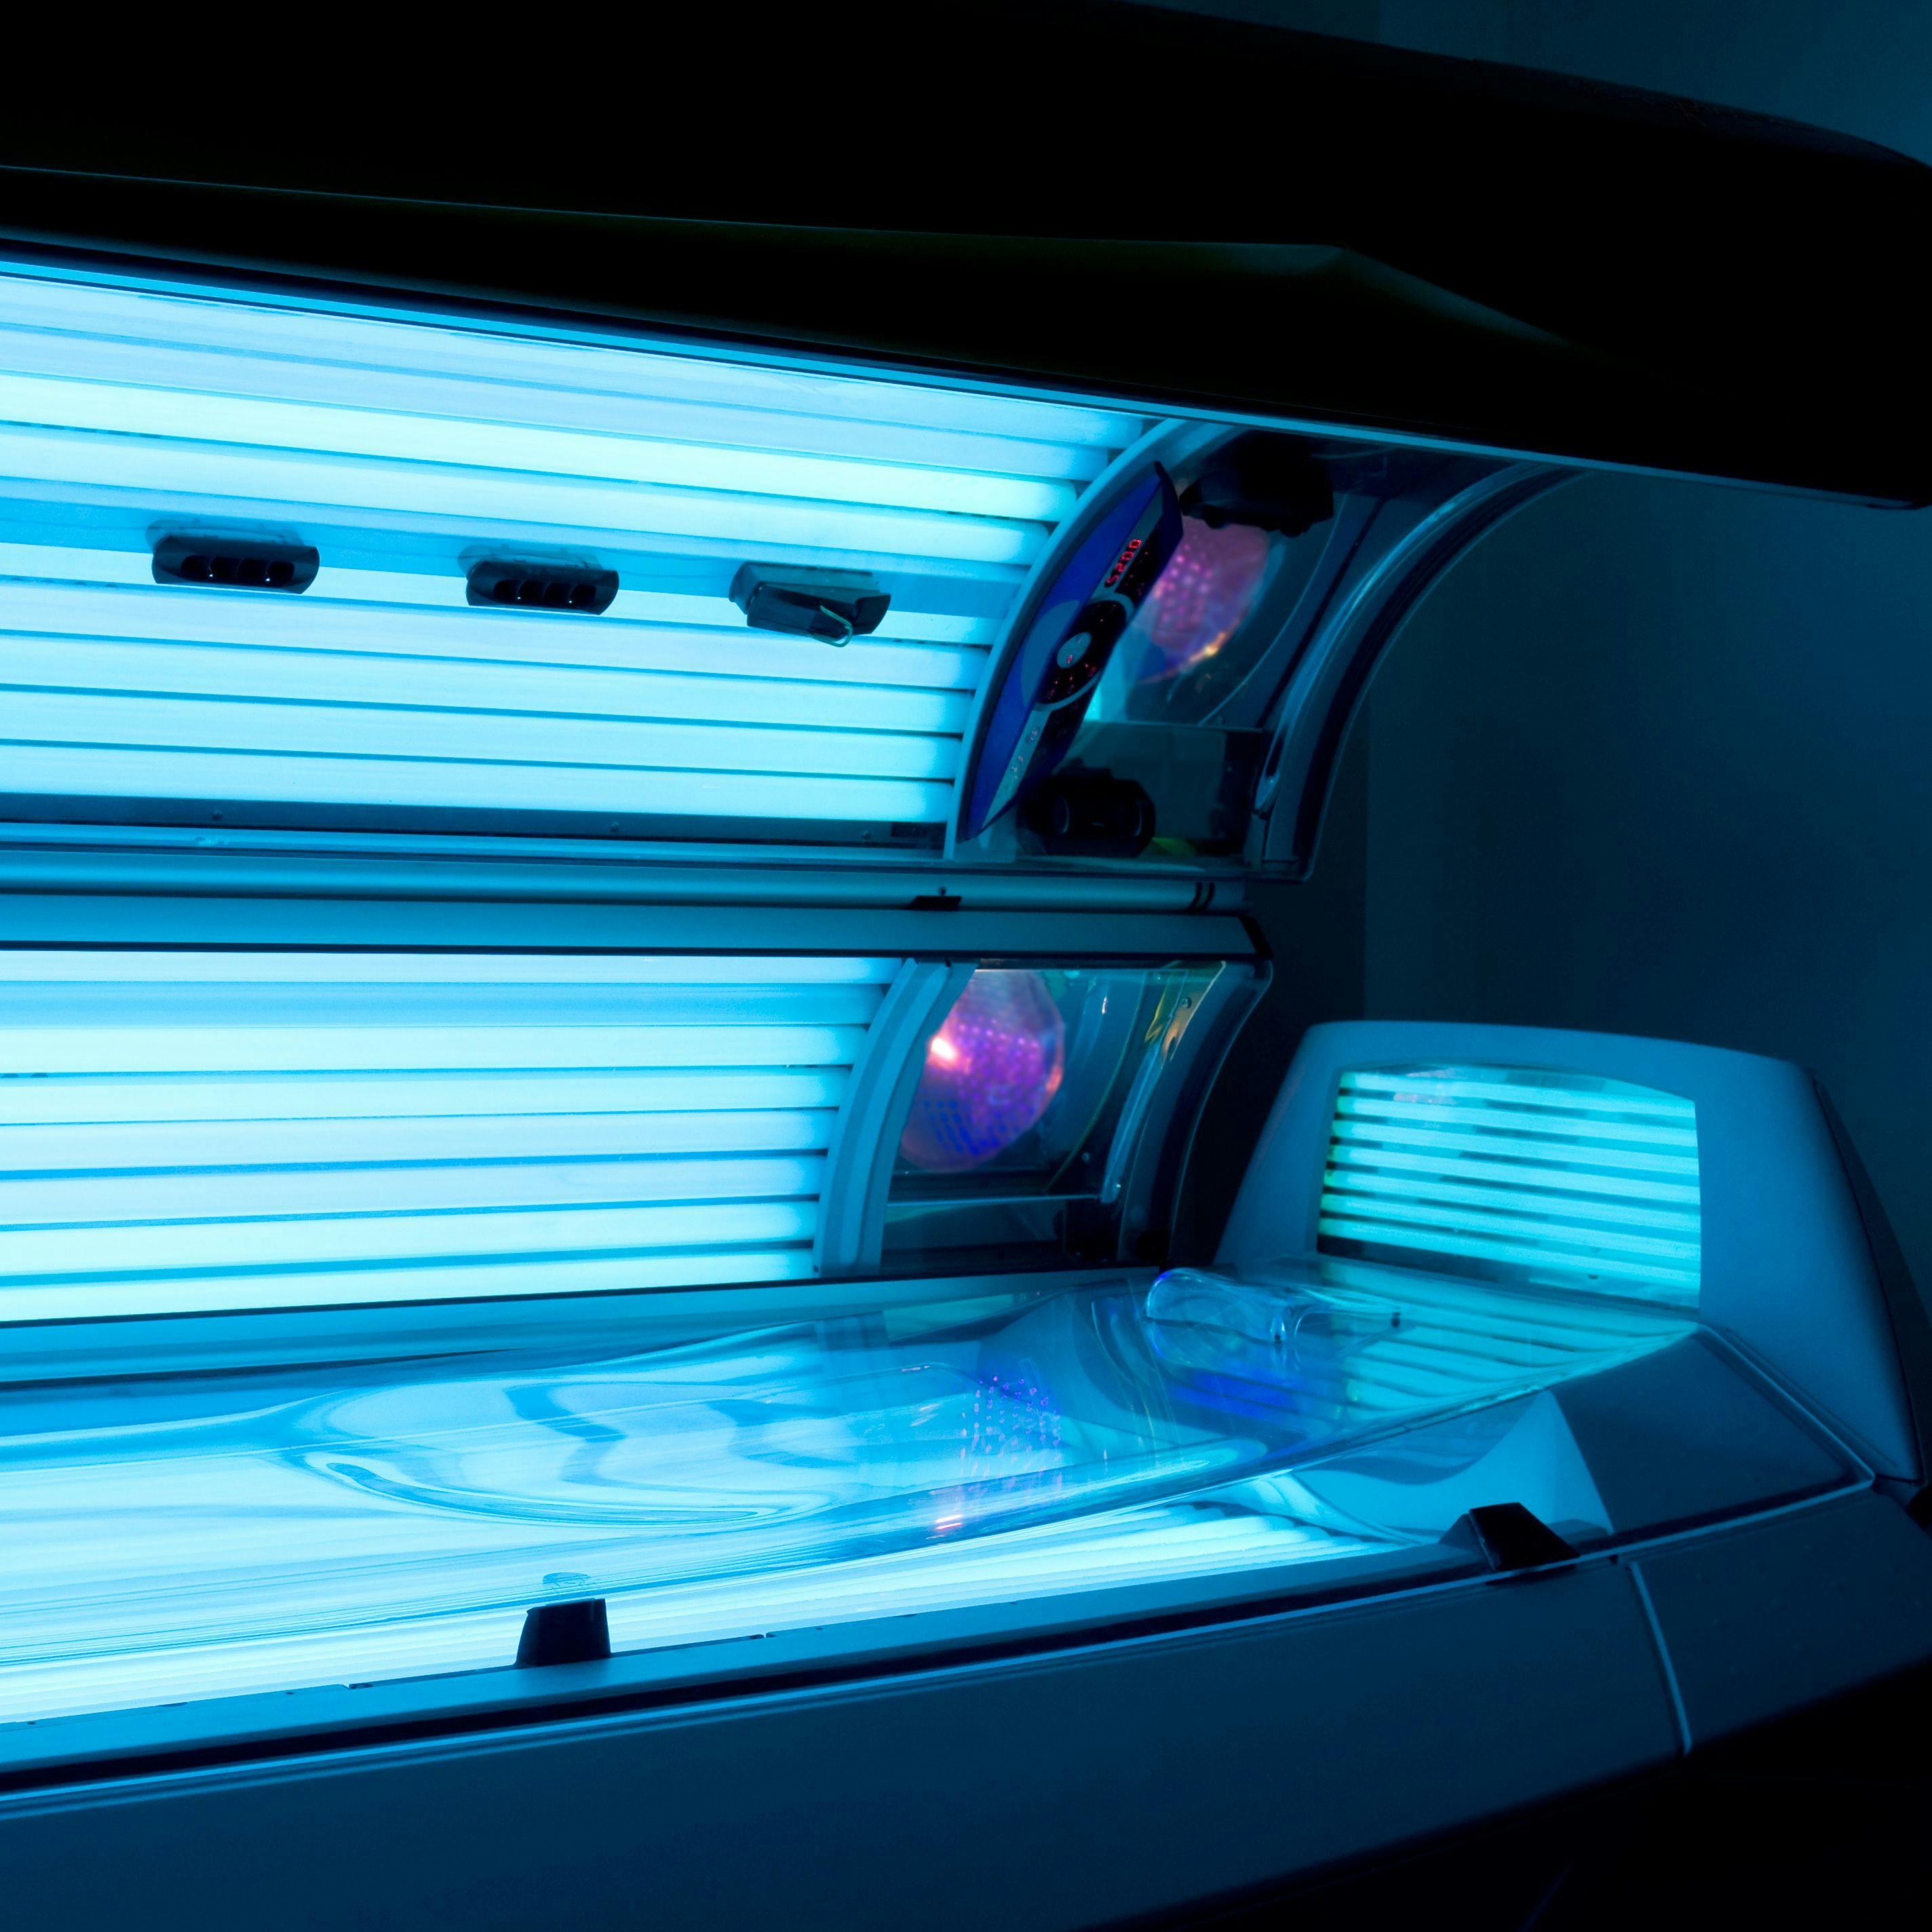 Many Tanning Salons Not Compliant With State Laws, Study Finds